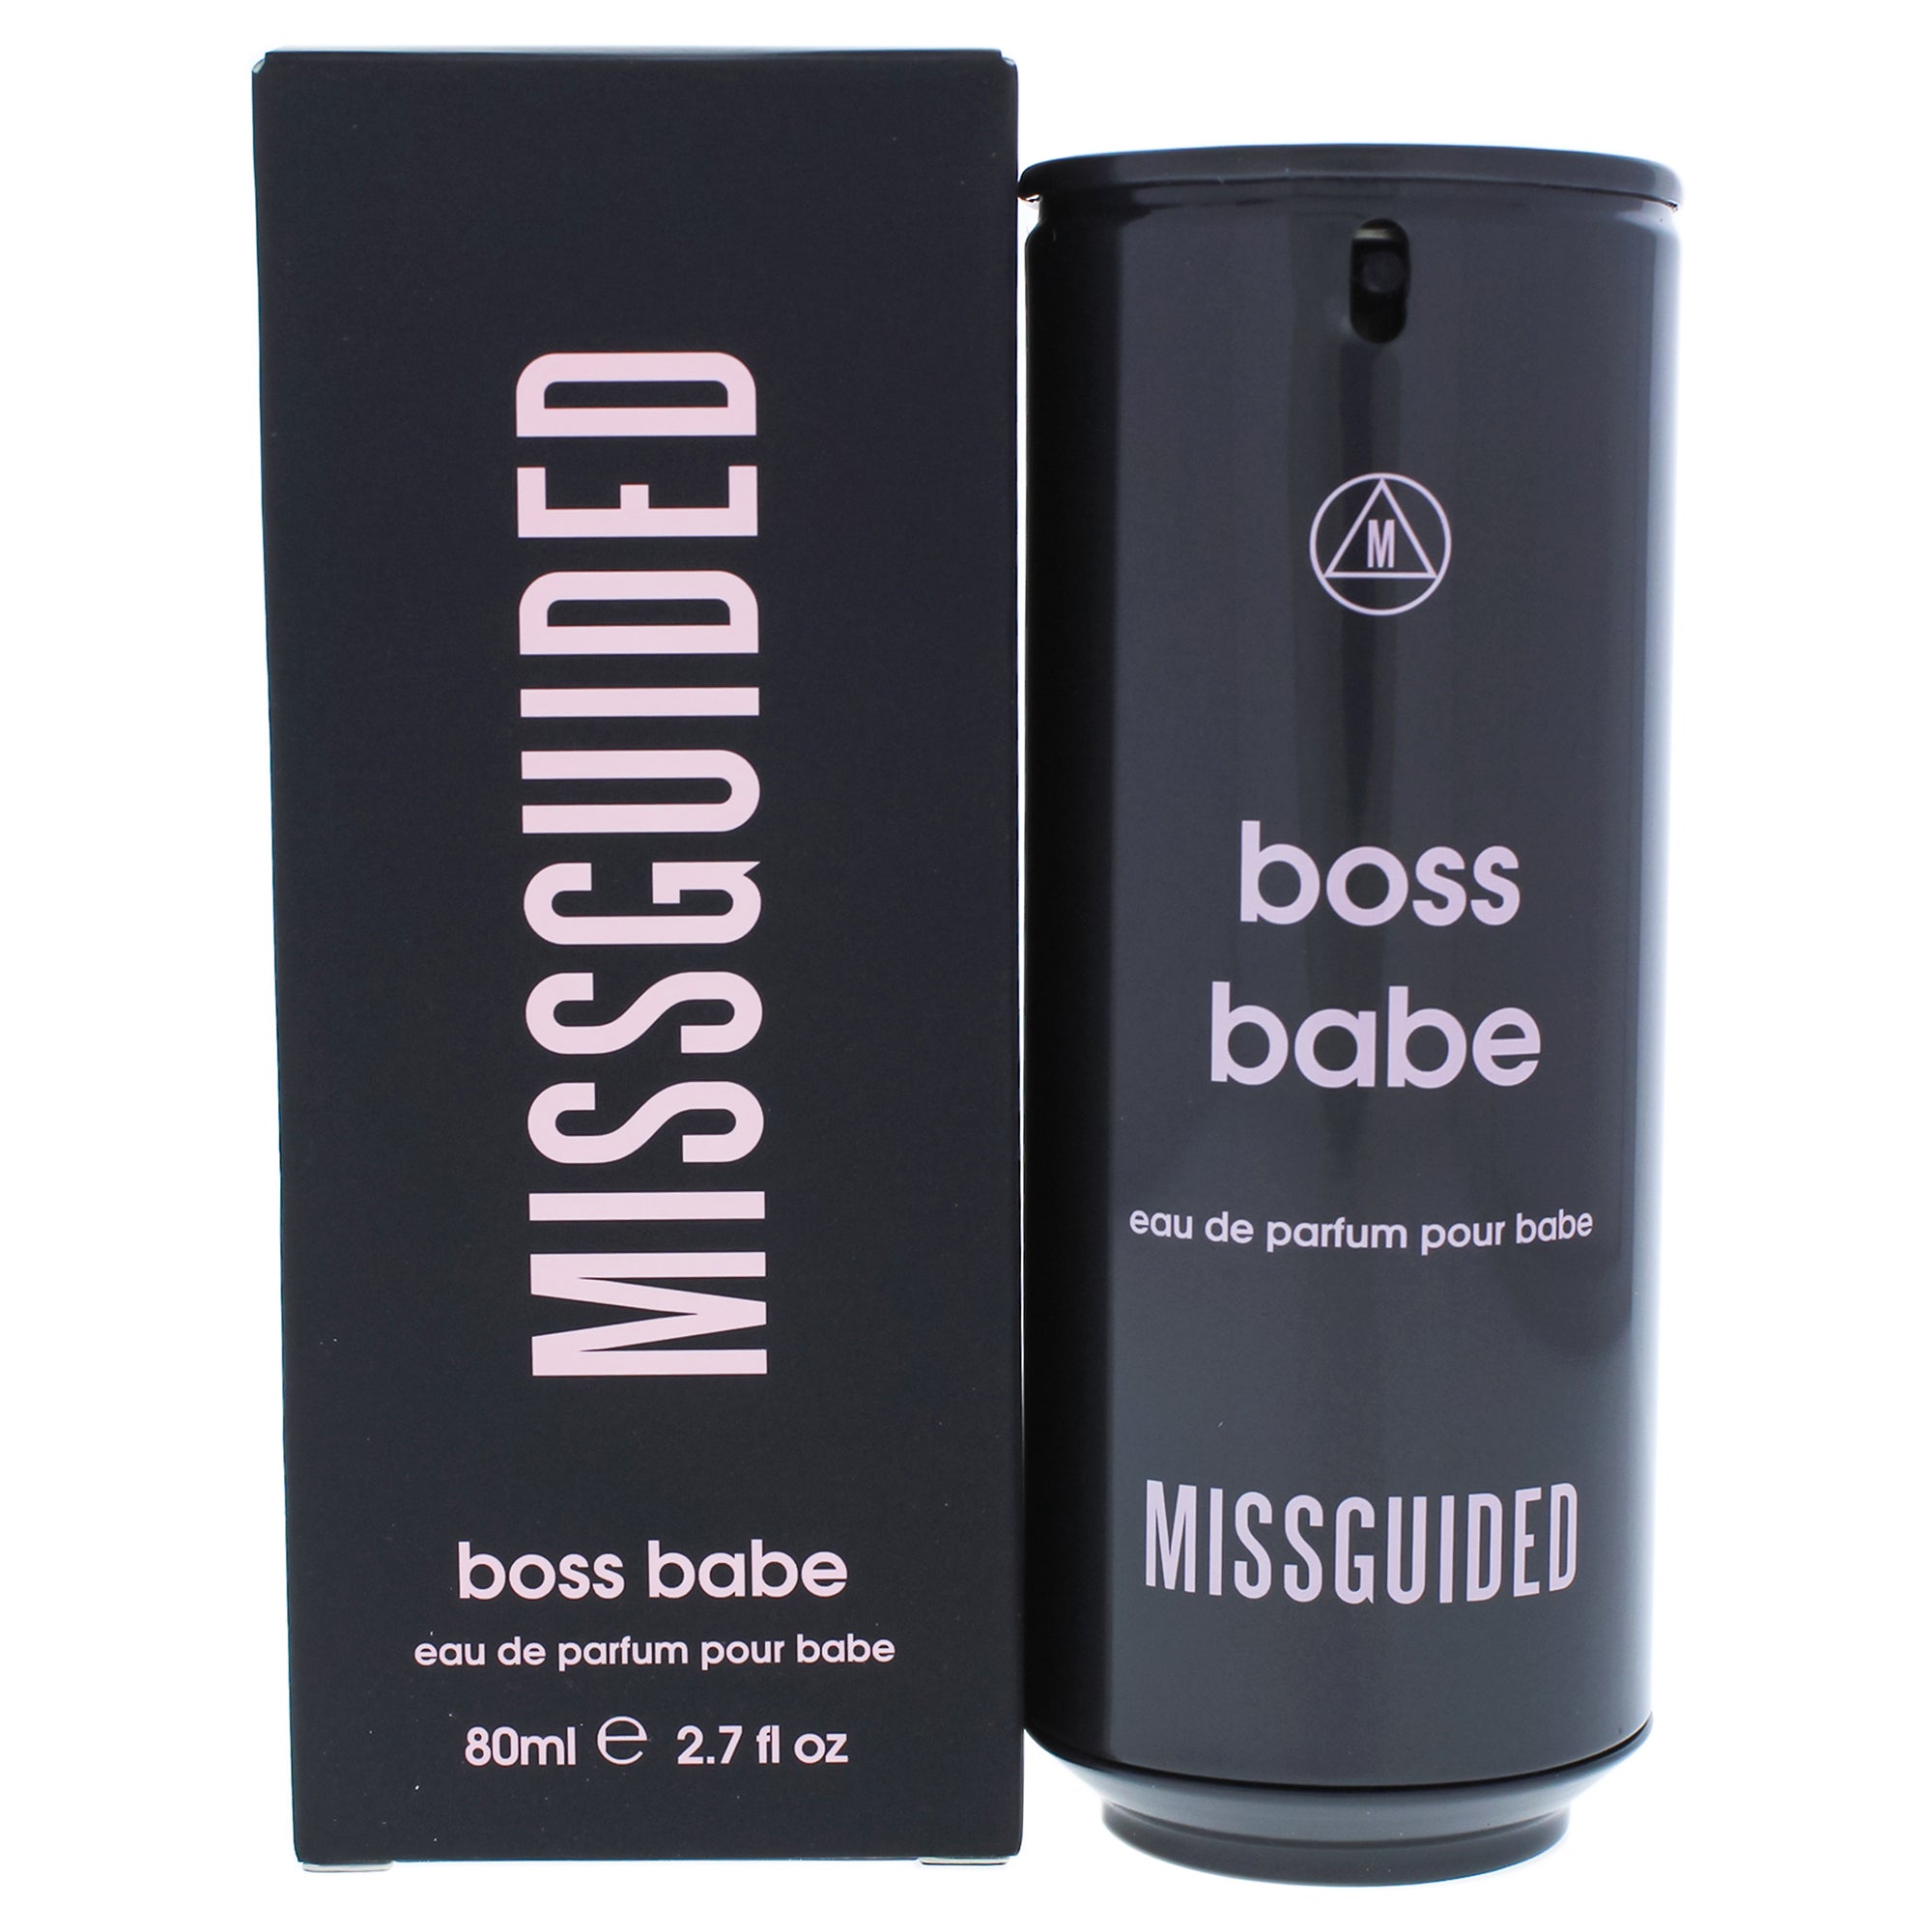 Boss Babe by Missguided for Women - 2.7 oz EDP Spray